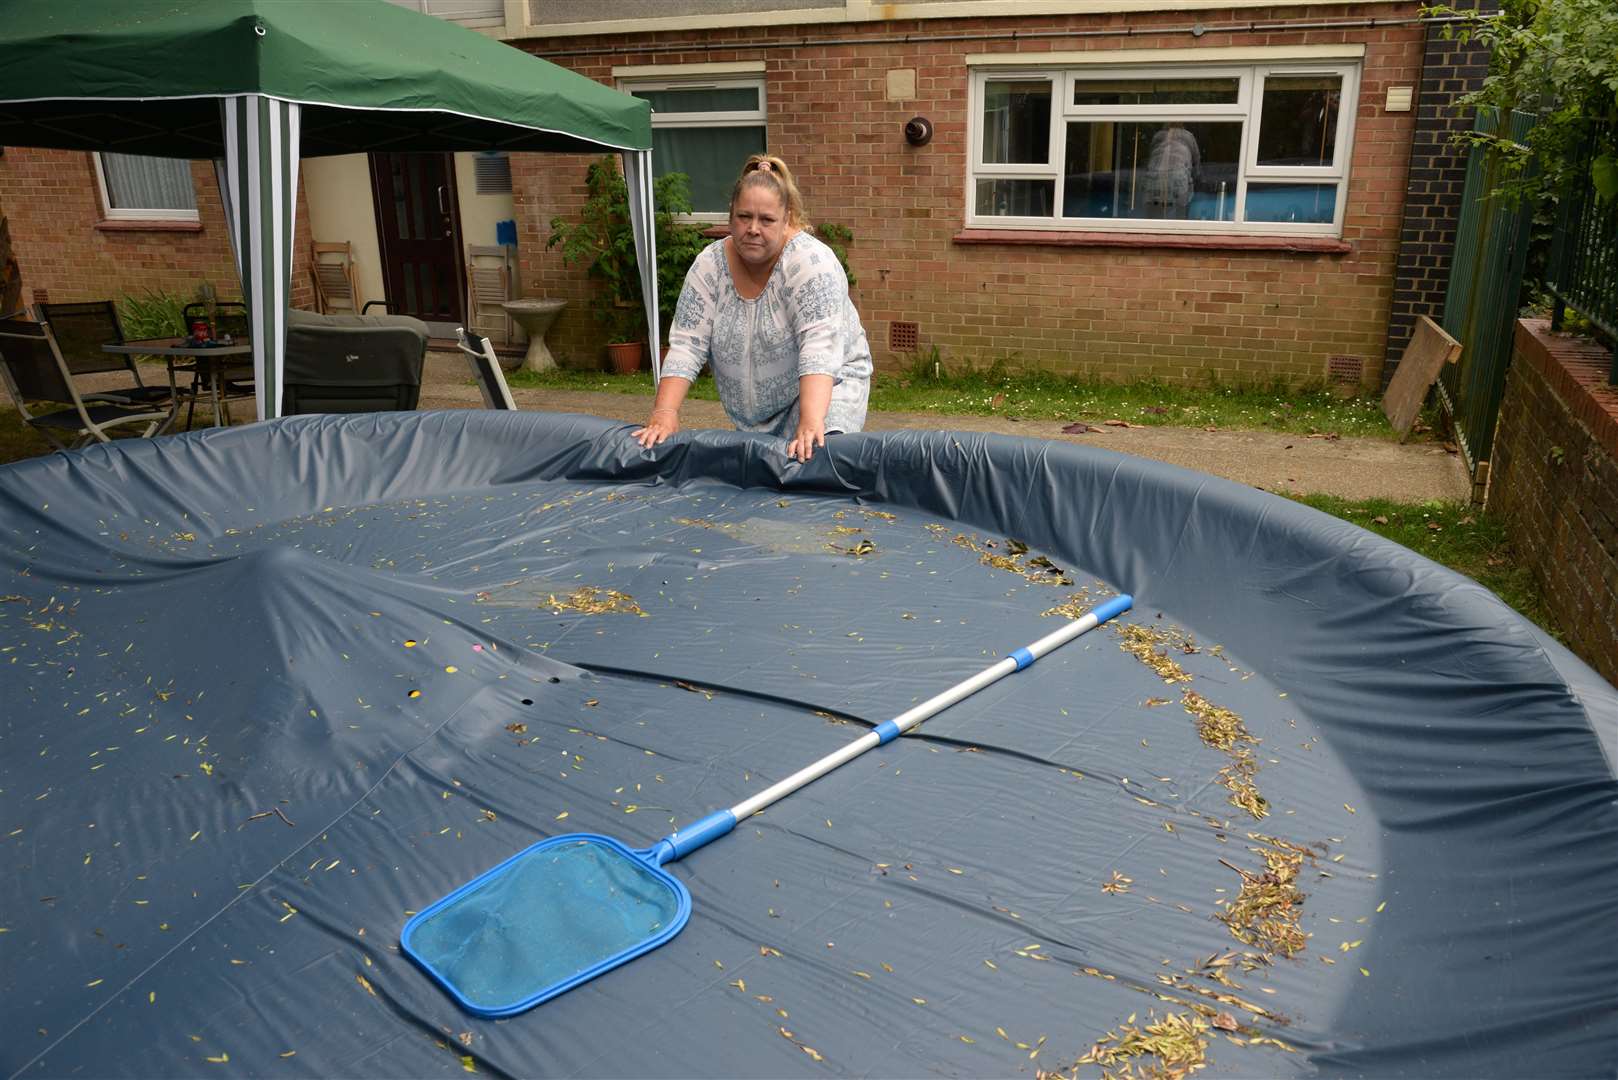 Maria Young of Albatross Avenue who has been told to remove a paddling pool from the back garden